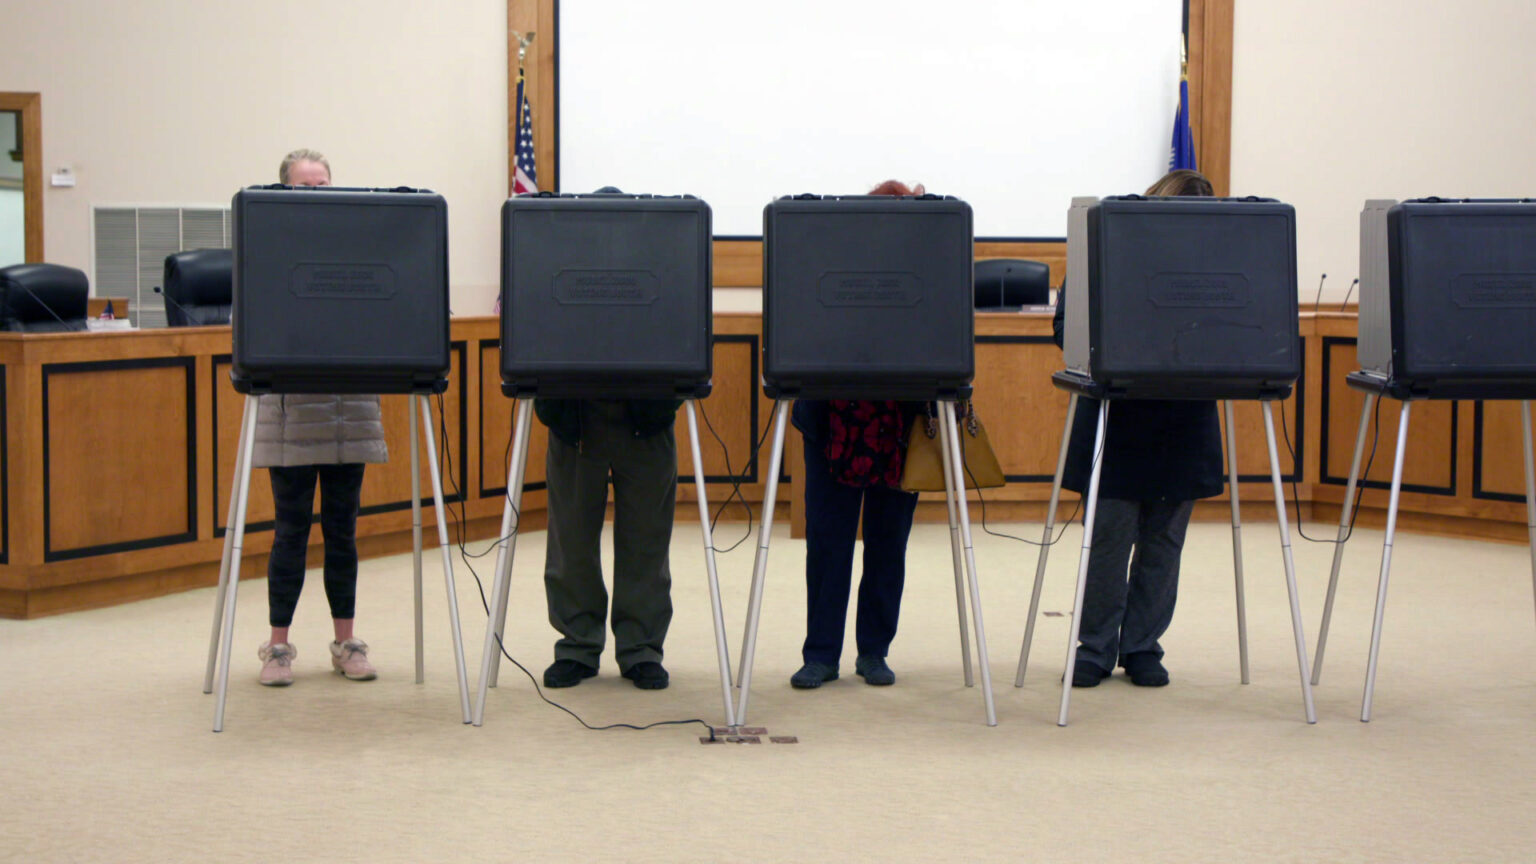 A row of collapsible voting booths with metal legs and plastic bodies stand in a row, with voters standing in four of them with only their legs visible, in a government meeting room with a chairs placed behind a low dais, the U.S. and Wisconsin flags, and a projector screen in the background.